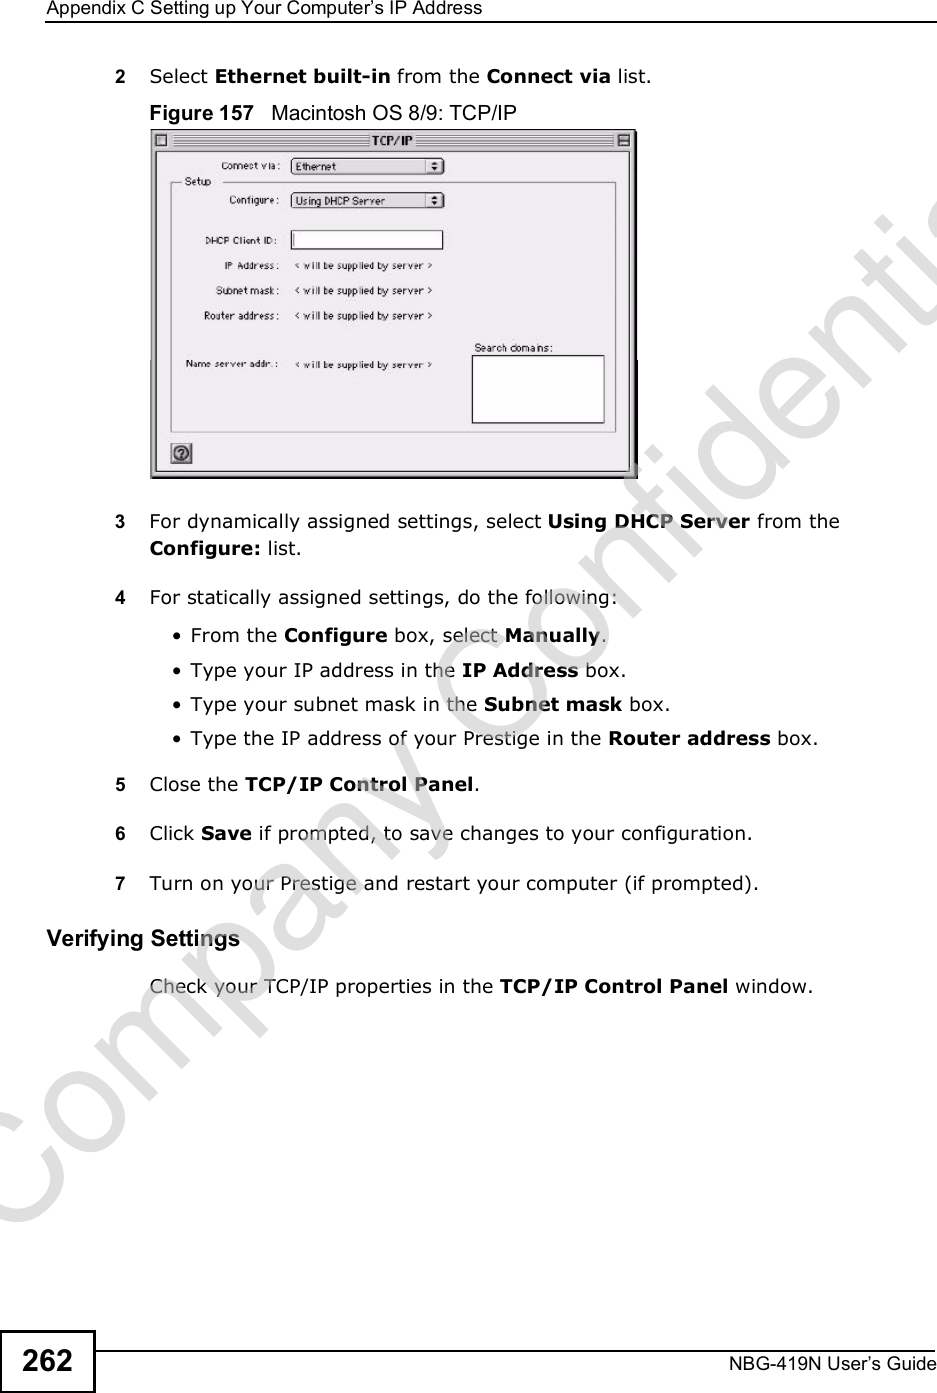 Appendix CSetting up Your Computer s IP AddressNBG-419N User s Guide2622Select Ethernet built-in from the Connect via list.Figure 157   Macintosh OS 8/9: TCP/IP3For dynamically assigned settings, select Using DHCP Server from the Configure: list.4For statically assigned settings, do the following: From the Configure box, select Manually. Type your IP address in the IP Address box. Type your subnet mask in the Subnet mask box. Type the IP address of your Prestige in the Router address box.5Close the TCP/IP Control Panel.6Click Save if prompted, to save changes to your configuration.7Turn on your Prestige and restart your computer (if prompted).Verifying SettingsCheck your TCP/IP properties in the TCP/IP Control Panel window.Company Confidential